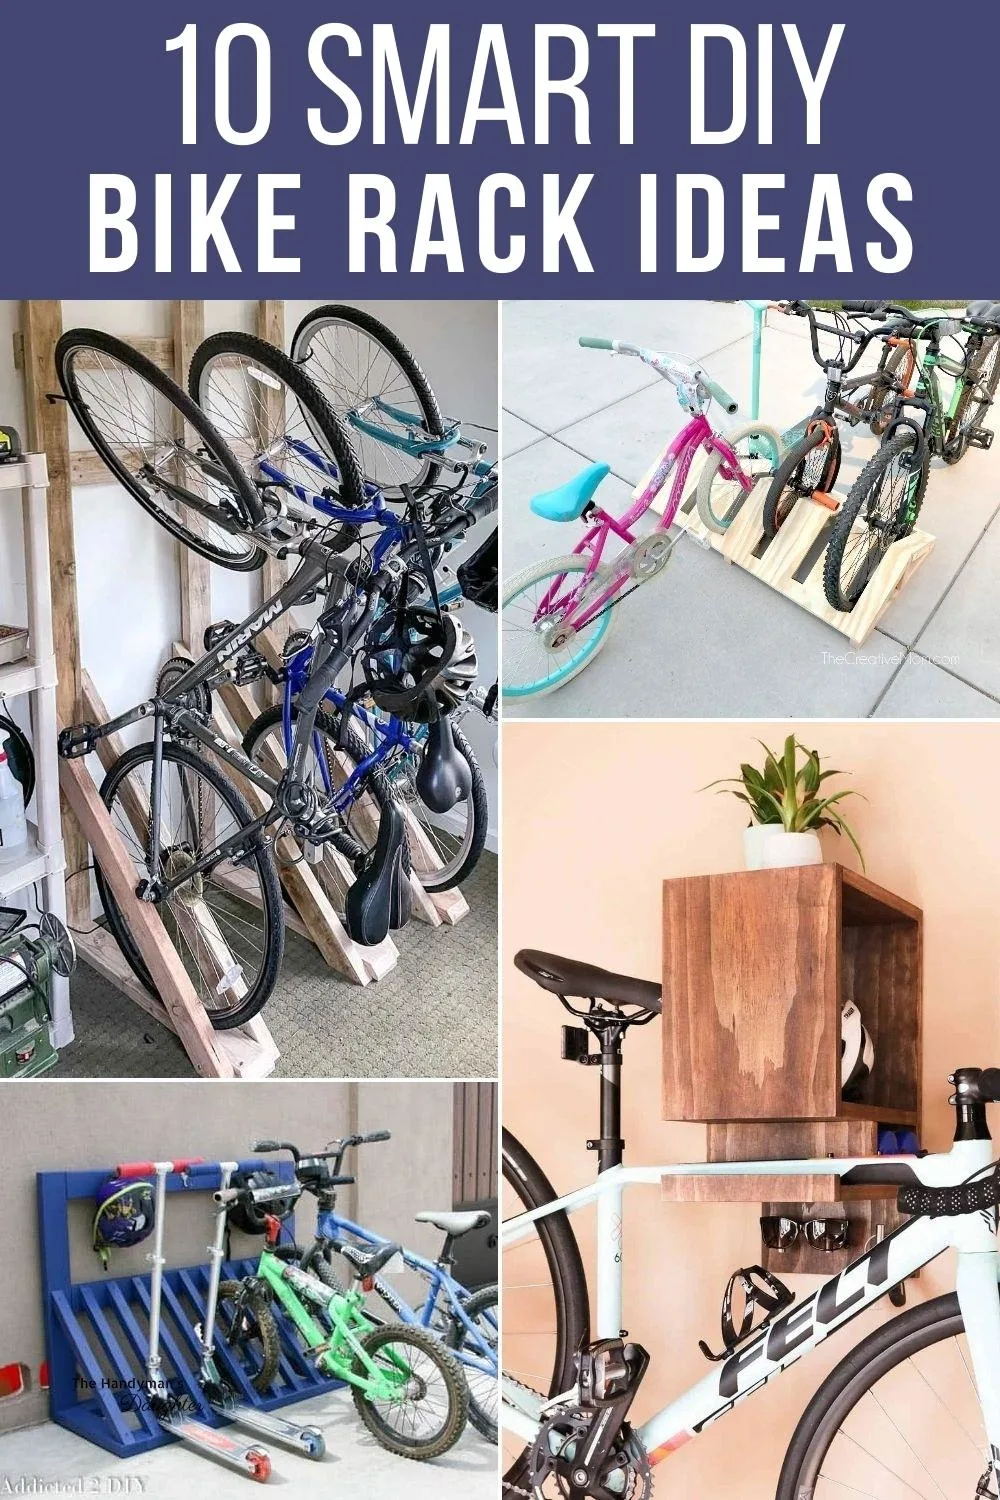 Adjustable Size Bicycle Water Bottle Holder The UpCycle Cage